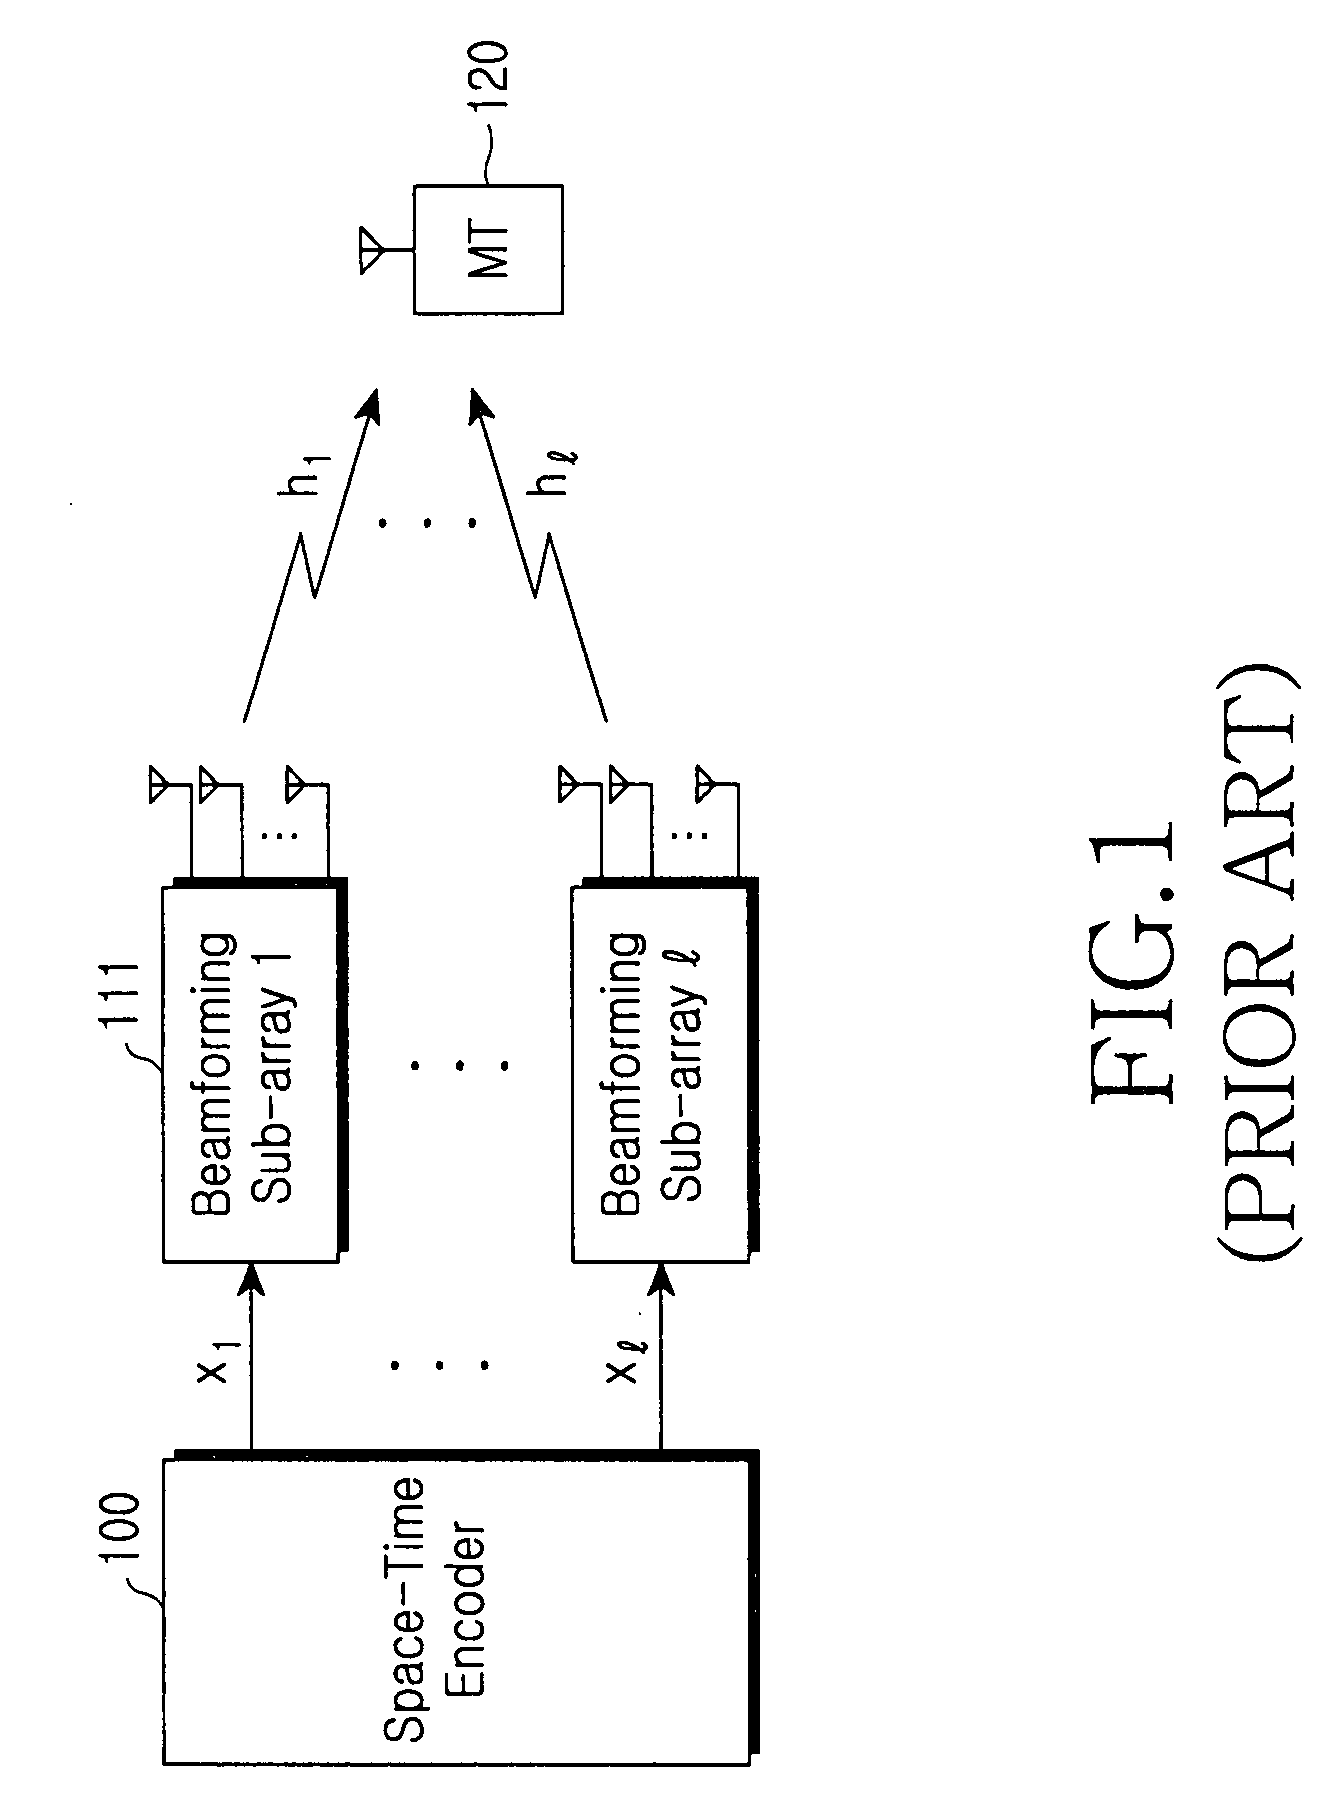 Method and apparatus for adaptively allocating transmission power for beam-forming combined with OSTBCs in a distributed wireless communication system